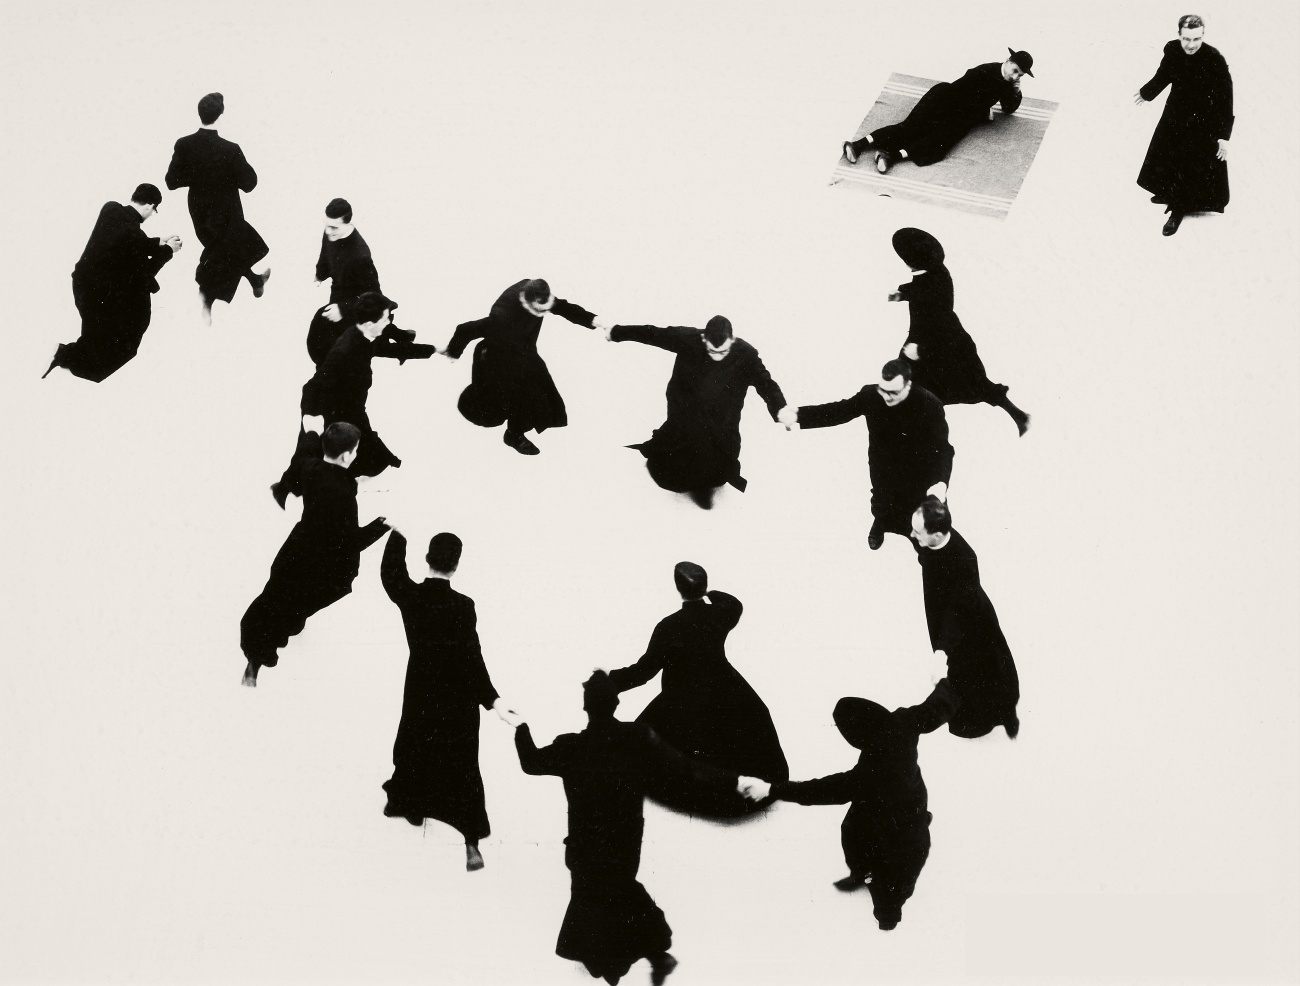 There are no hands to caress my face | Mario Giacomelli